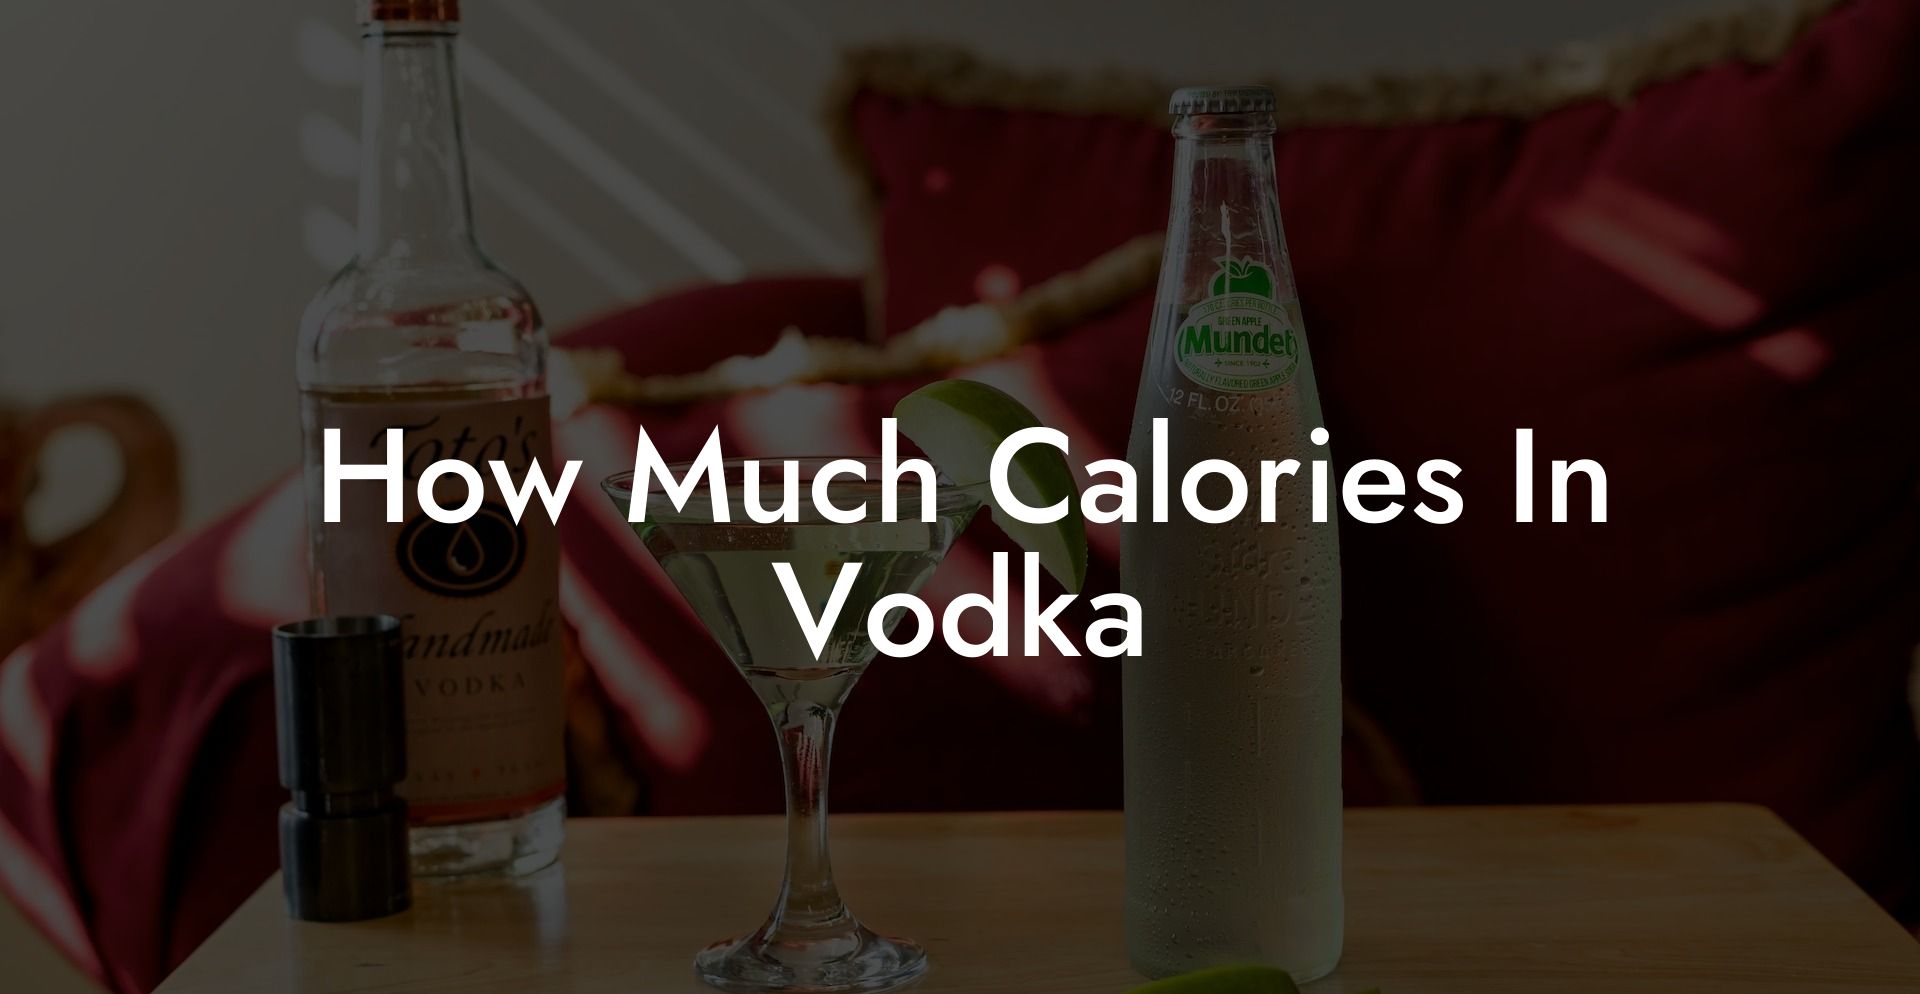 How Much Calories In Vodka